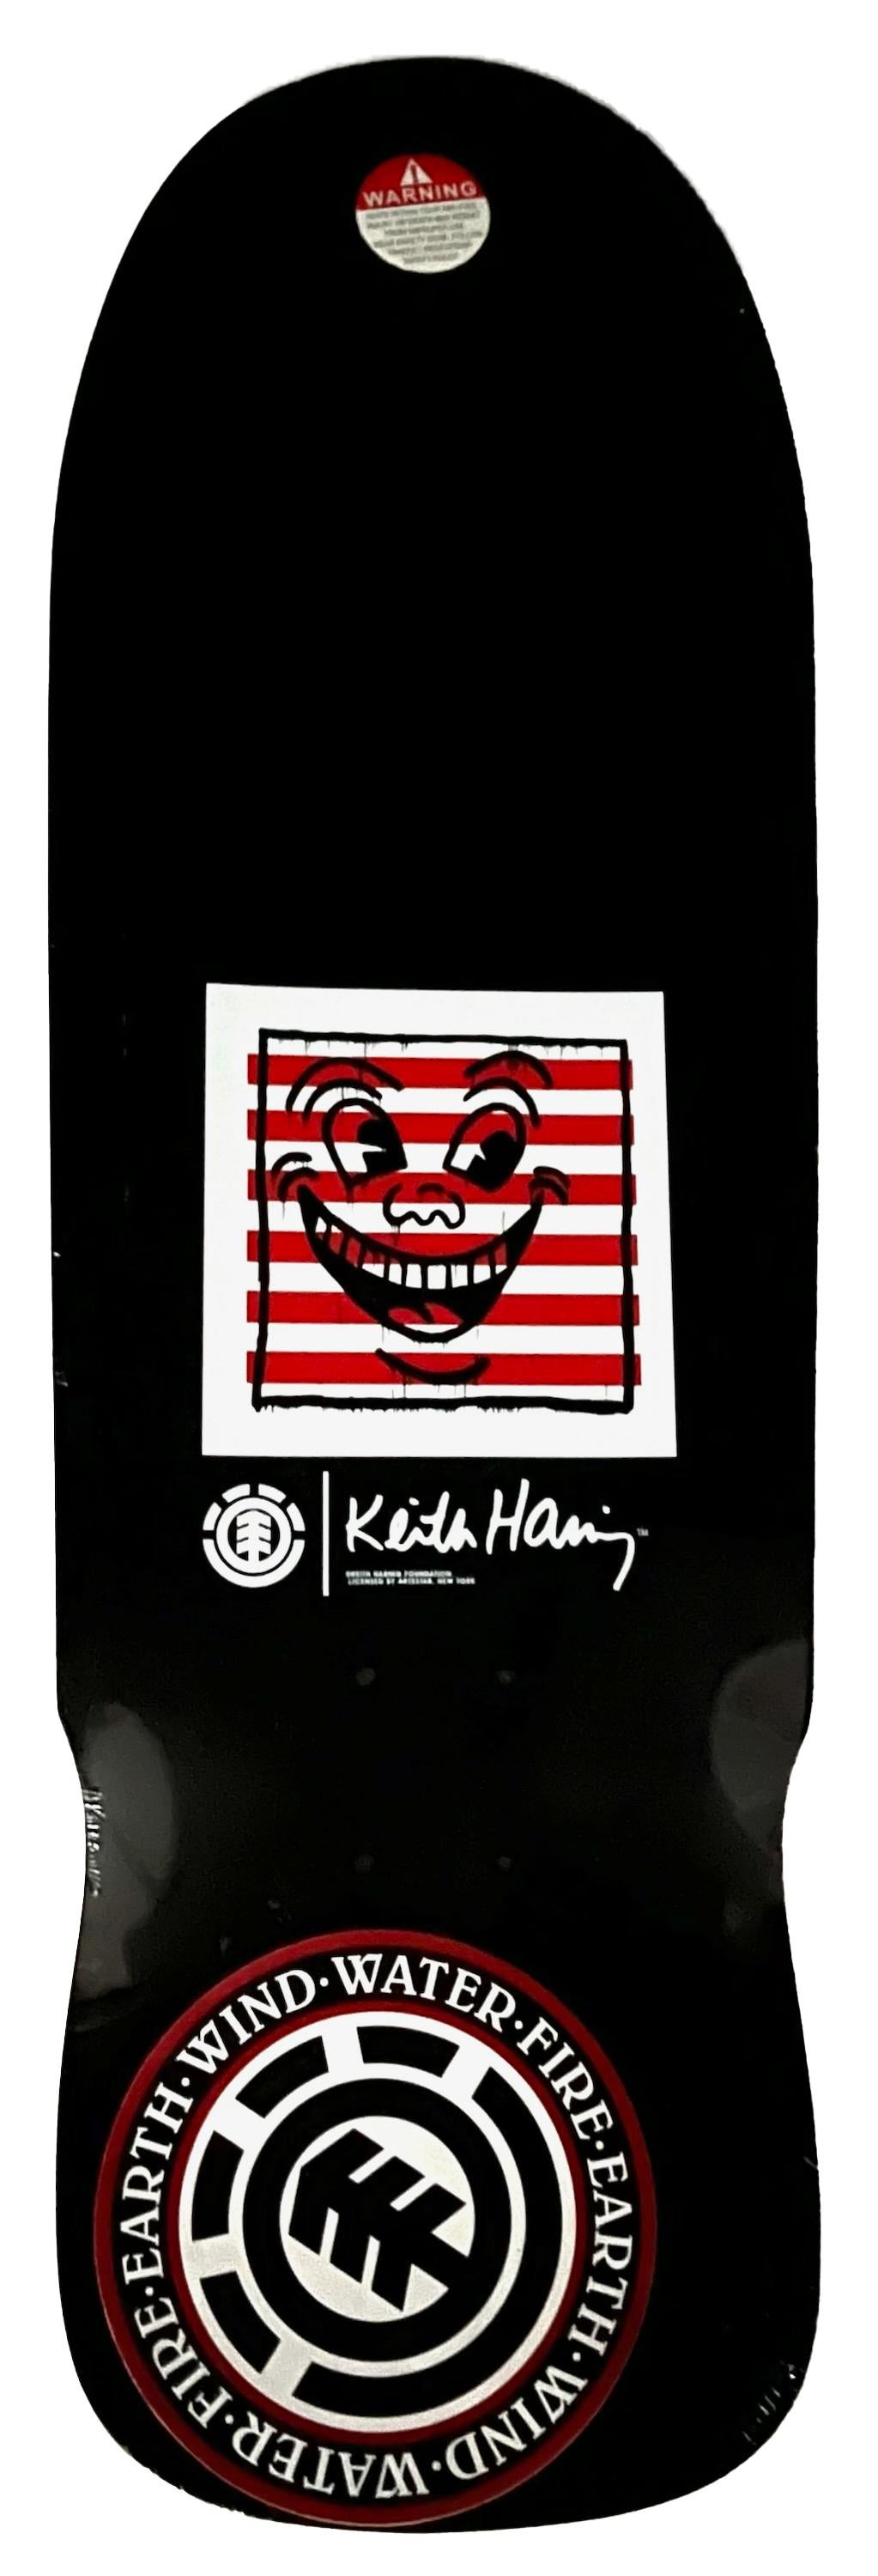 Keith Haring Skateboard Deck 2019:
Sold out, limited edition estate trademarked Keith Haring Skateboard Deck featuring the artist's iconic imagery. This work is from a sold out collaboration between Element skateboards and the Keith Haring